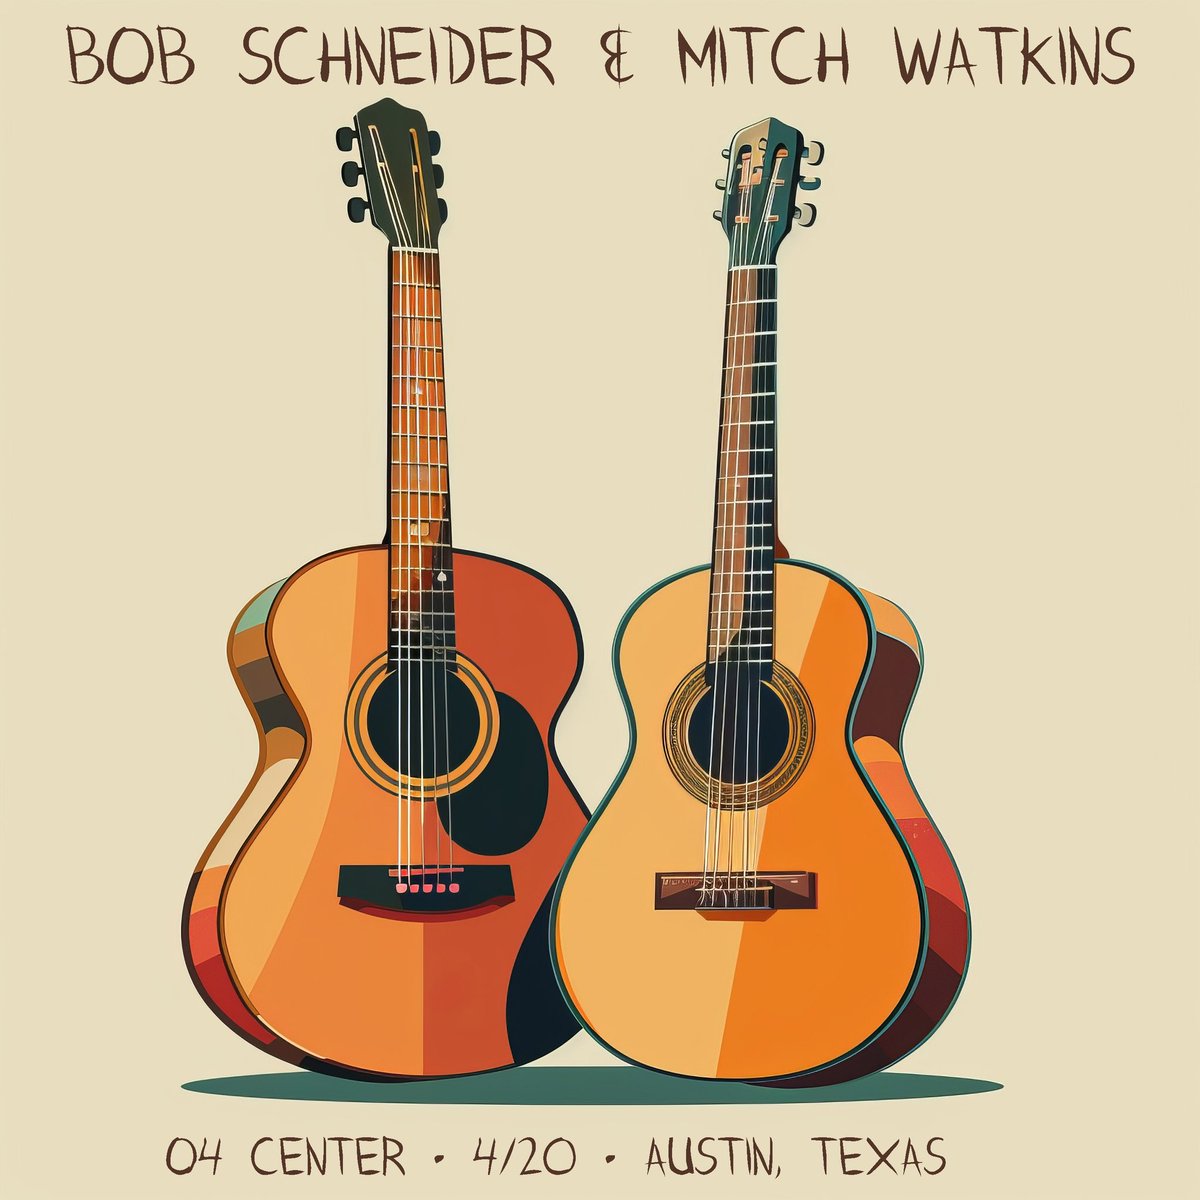 Saturday, April 20 at @04Center is SOLD OUT. Mitch and I are really looking forward to this evening. Thanks and see you soon.